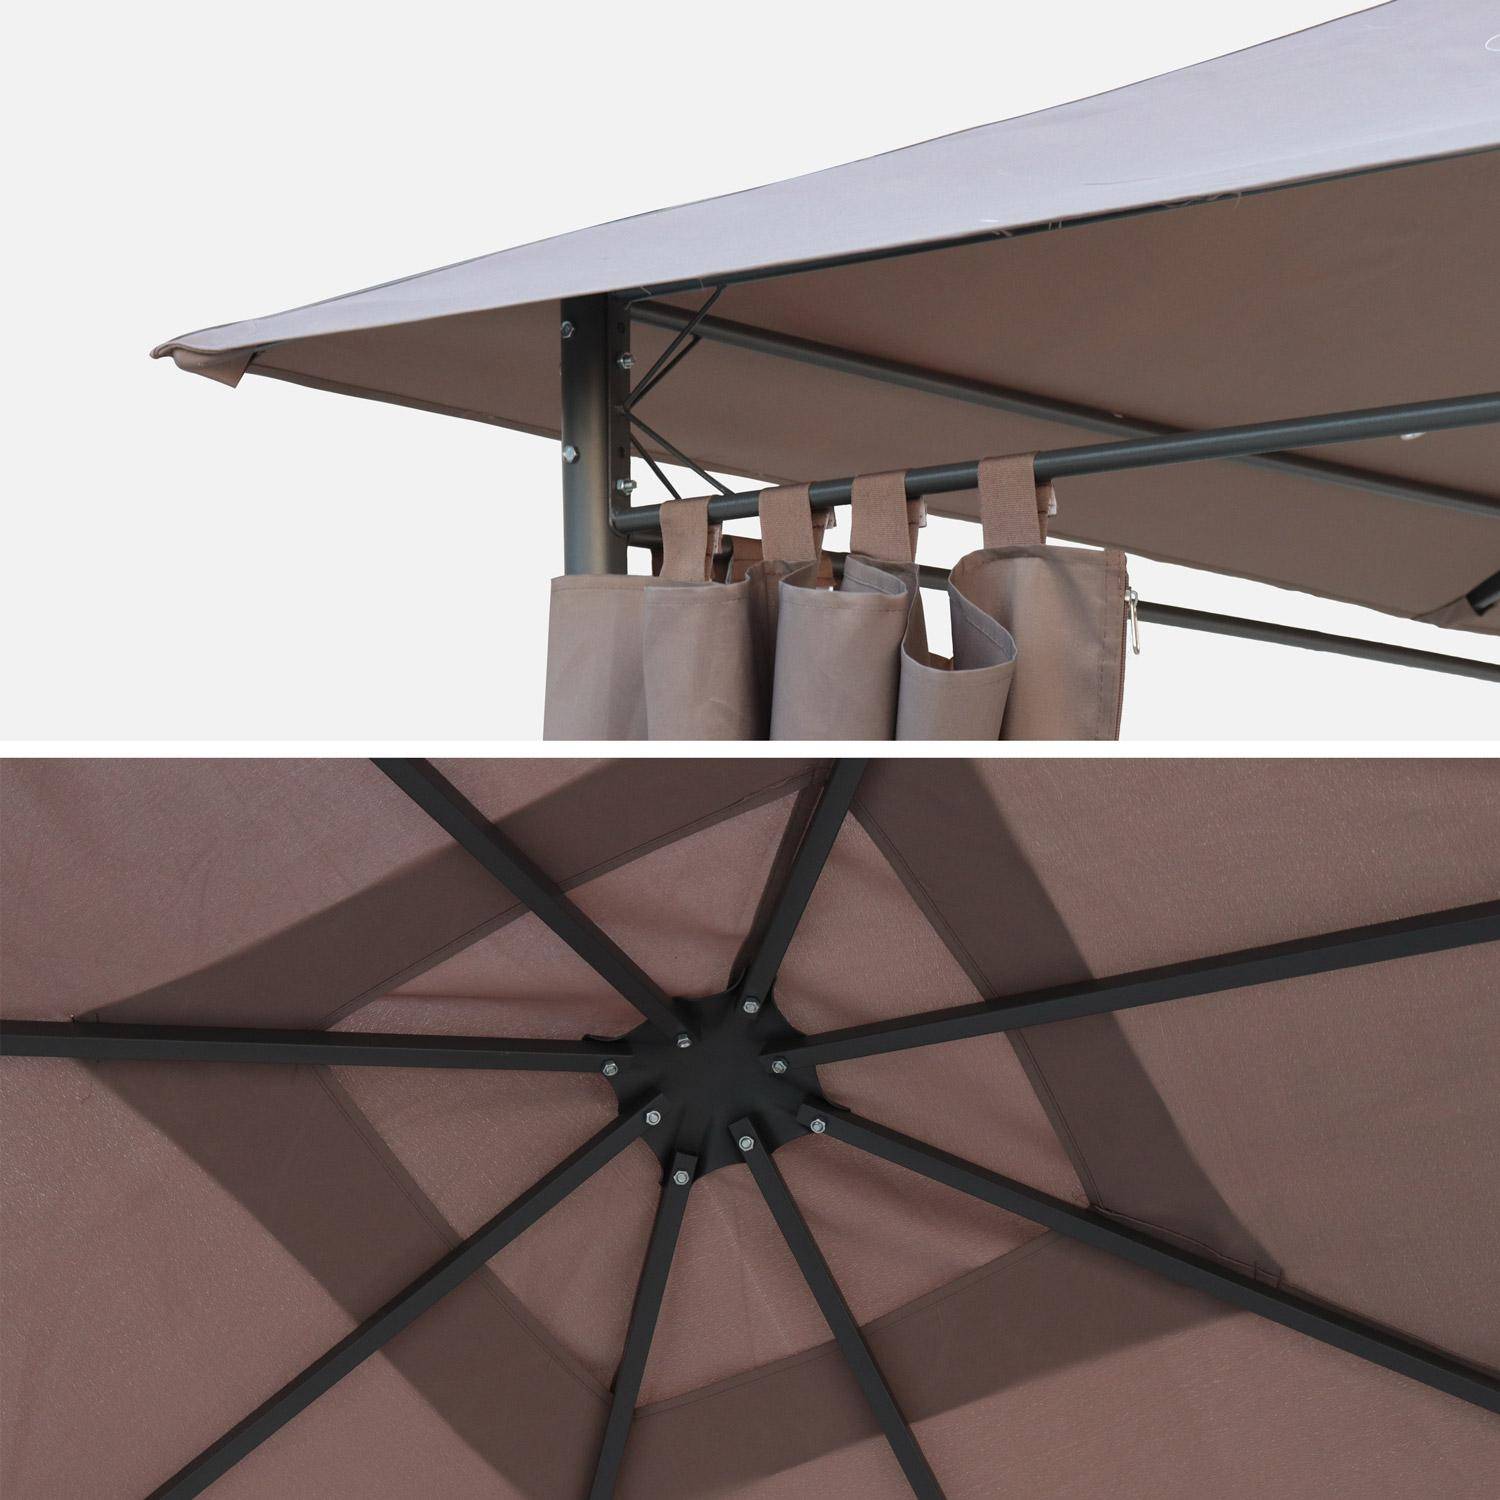 Taupe roof cover for Elusa 3x3m arbour - pergola cover, replacement cover Photo2